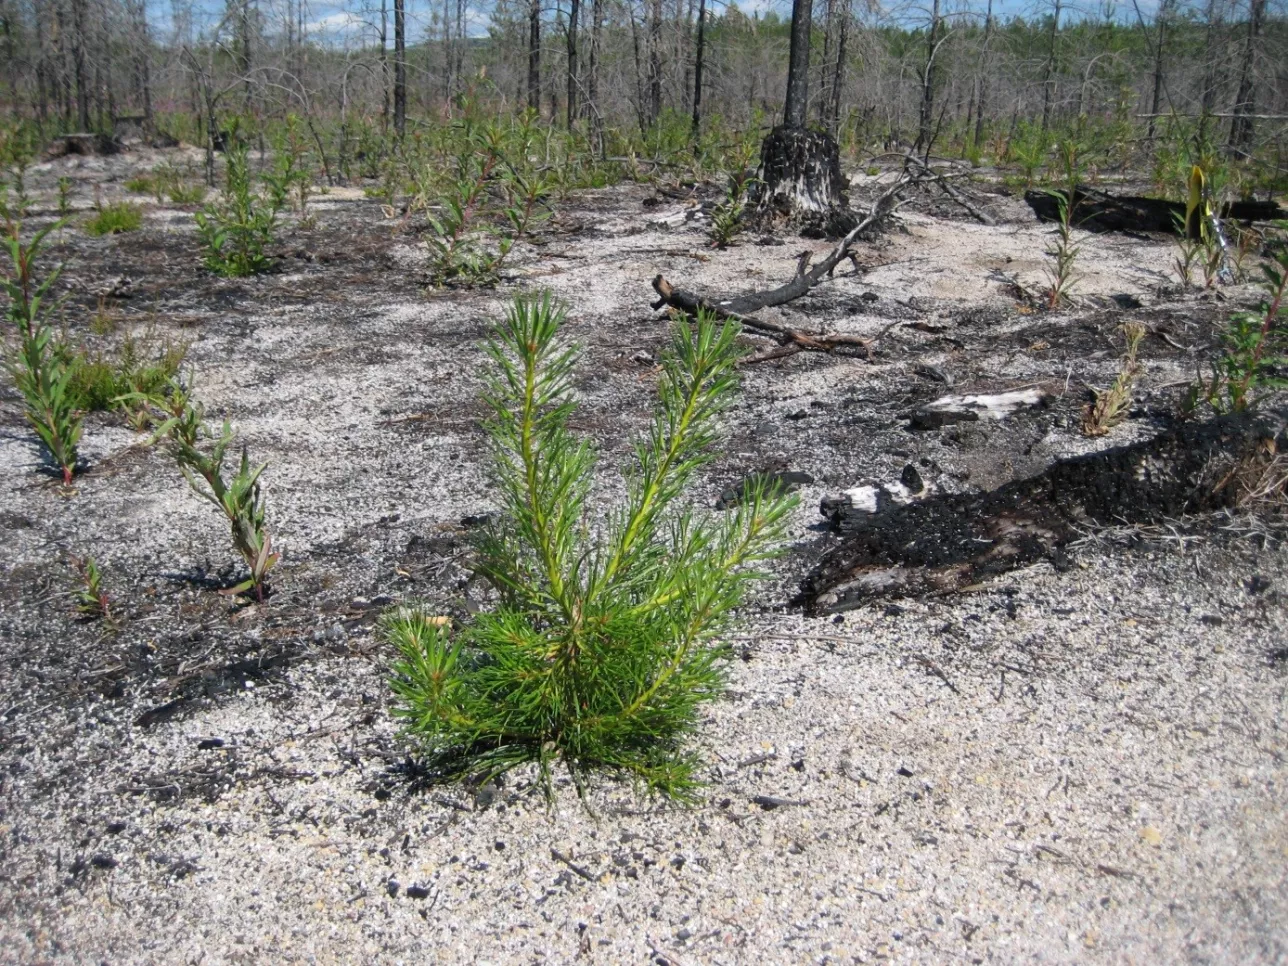 Growing forest after forest fire. Photo.